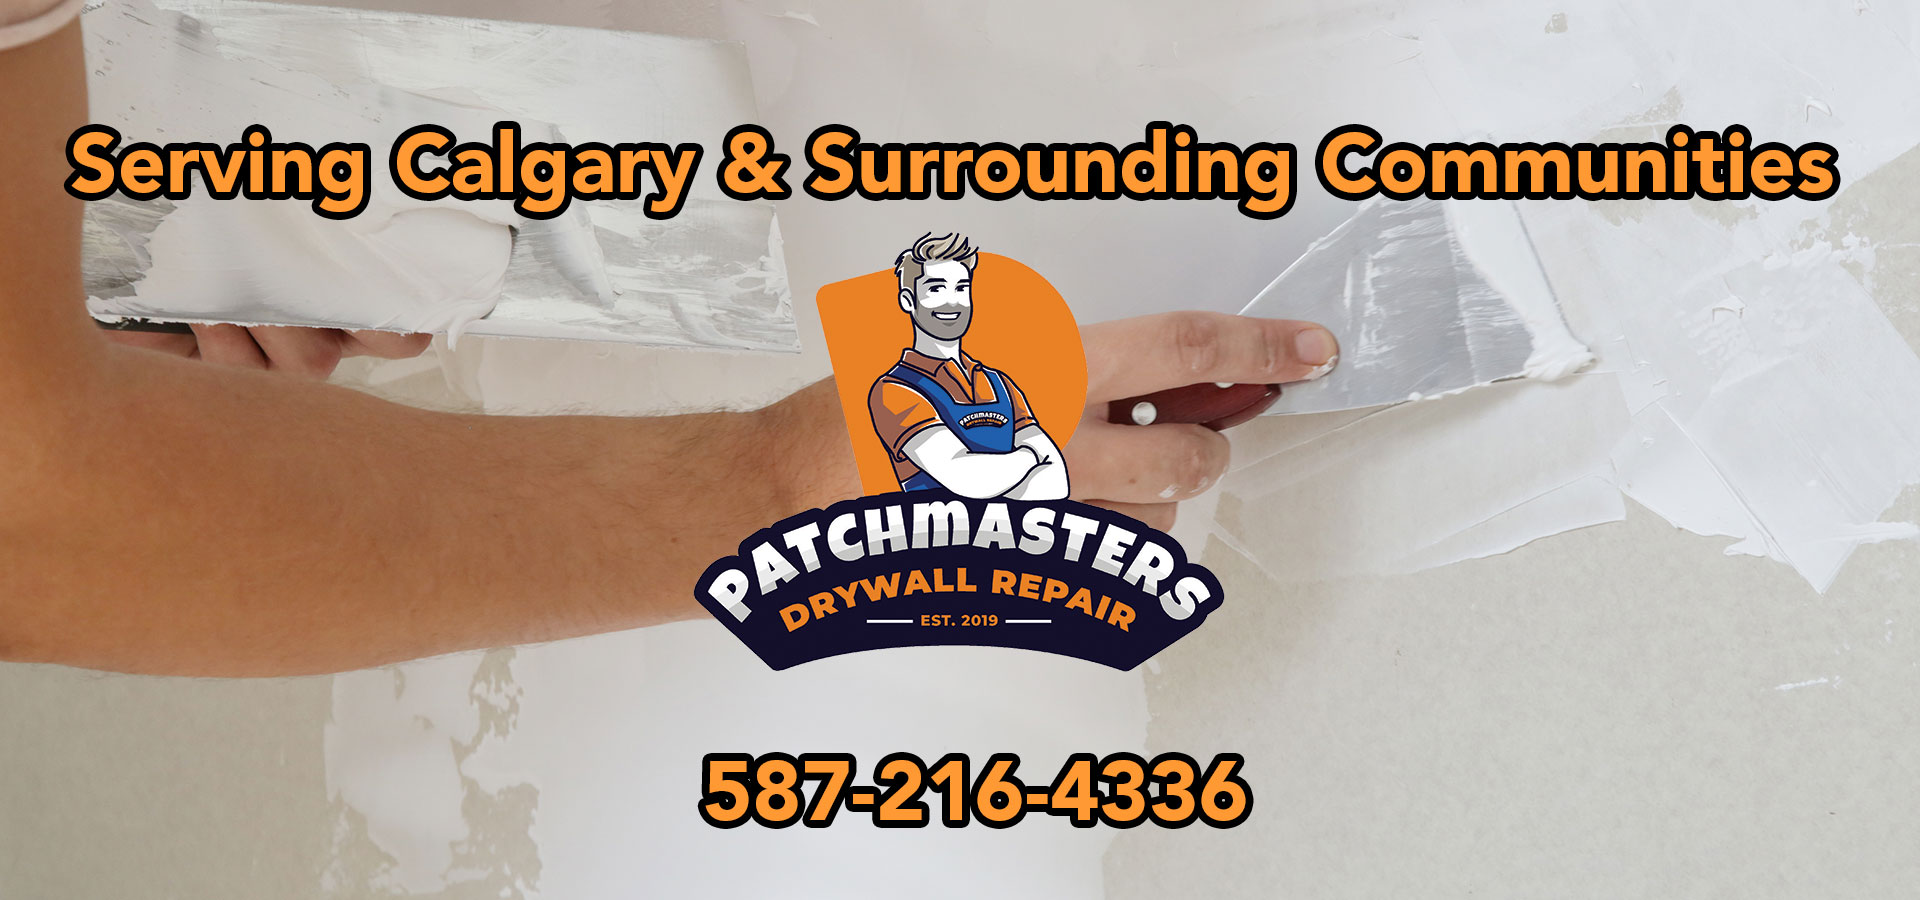 Need drywall repair?  No job is too small (or too big) for Patchmasters!